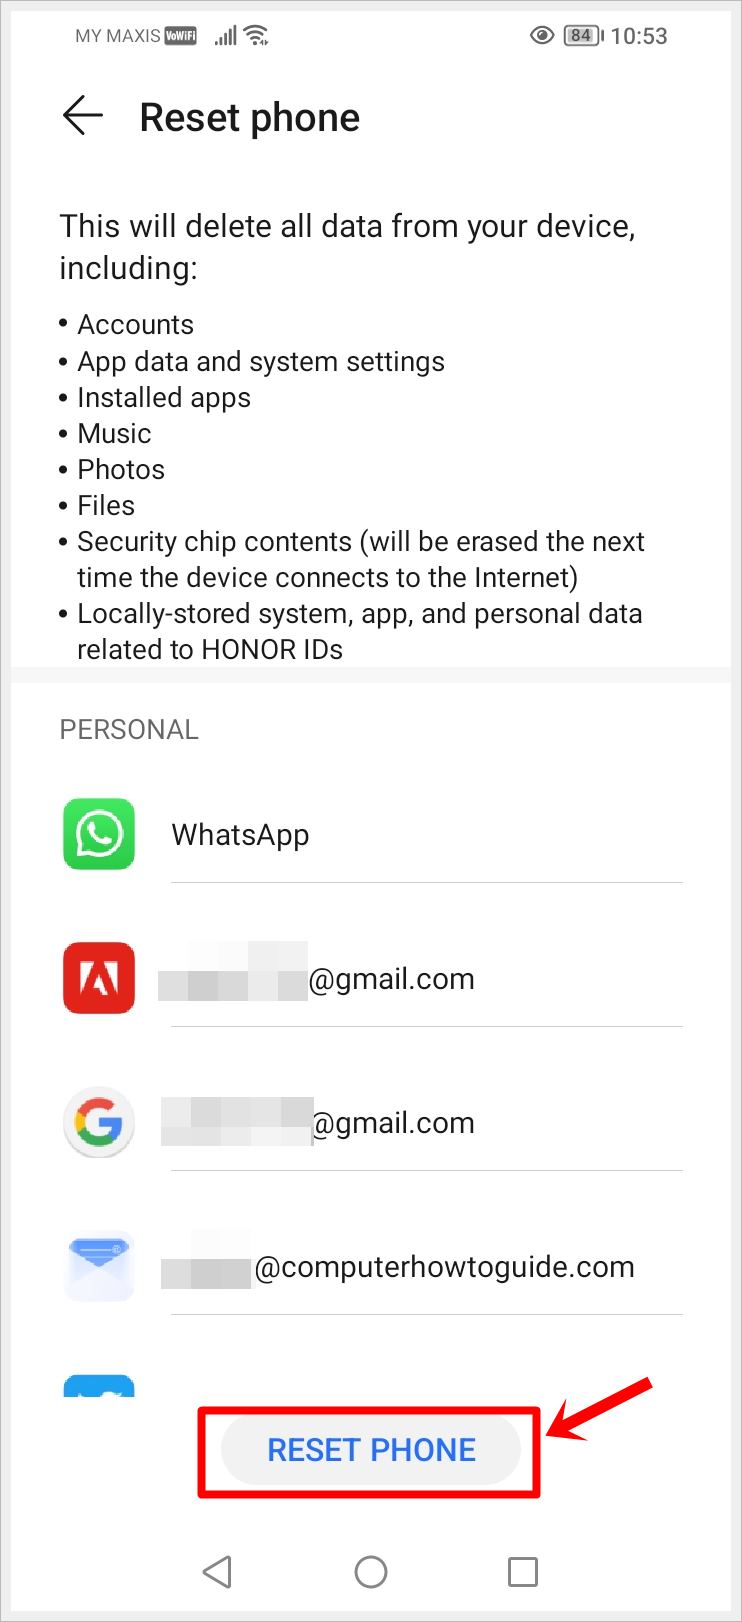 Fix Android Ghost Touch: This image shows the 'Reset phone' page of an Android phone, with the 'Confirm Resetting Phone' button highlighted.